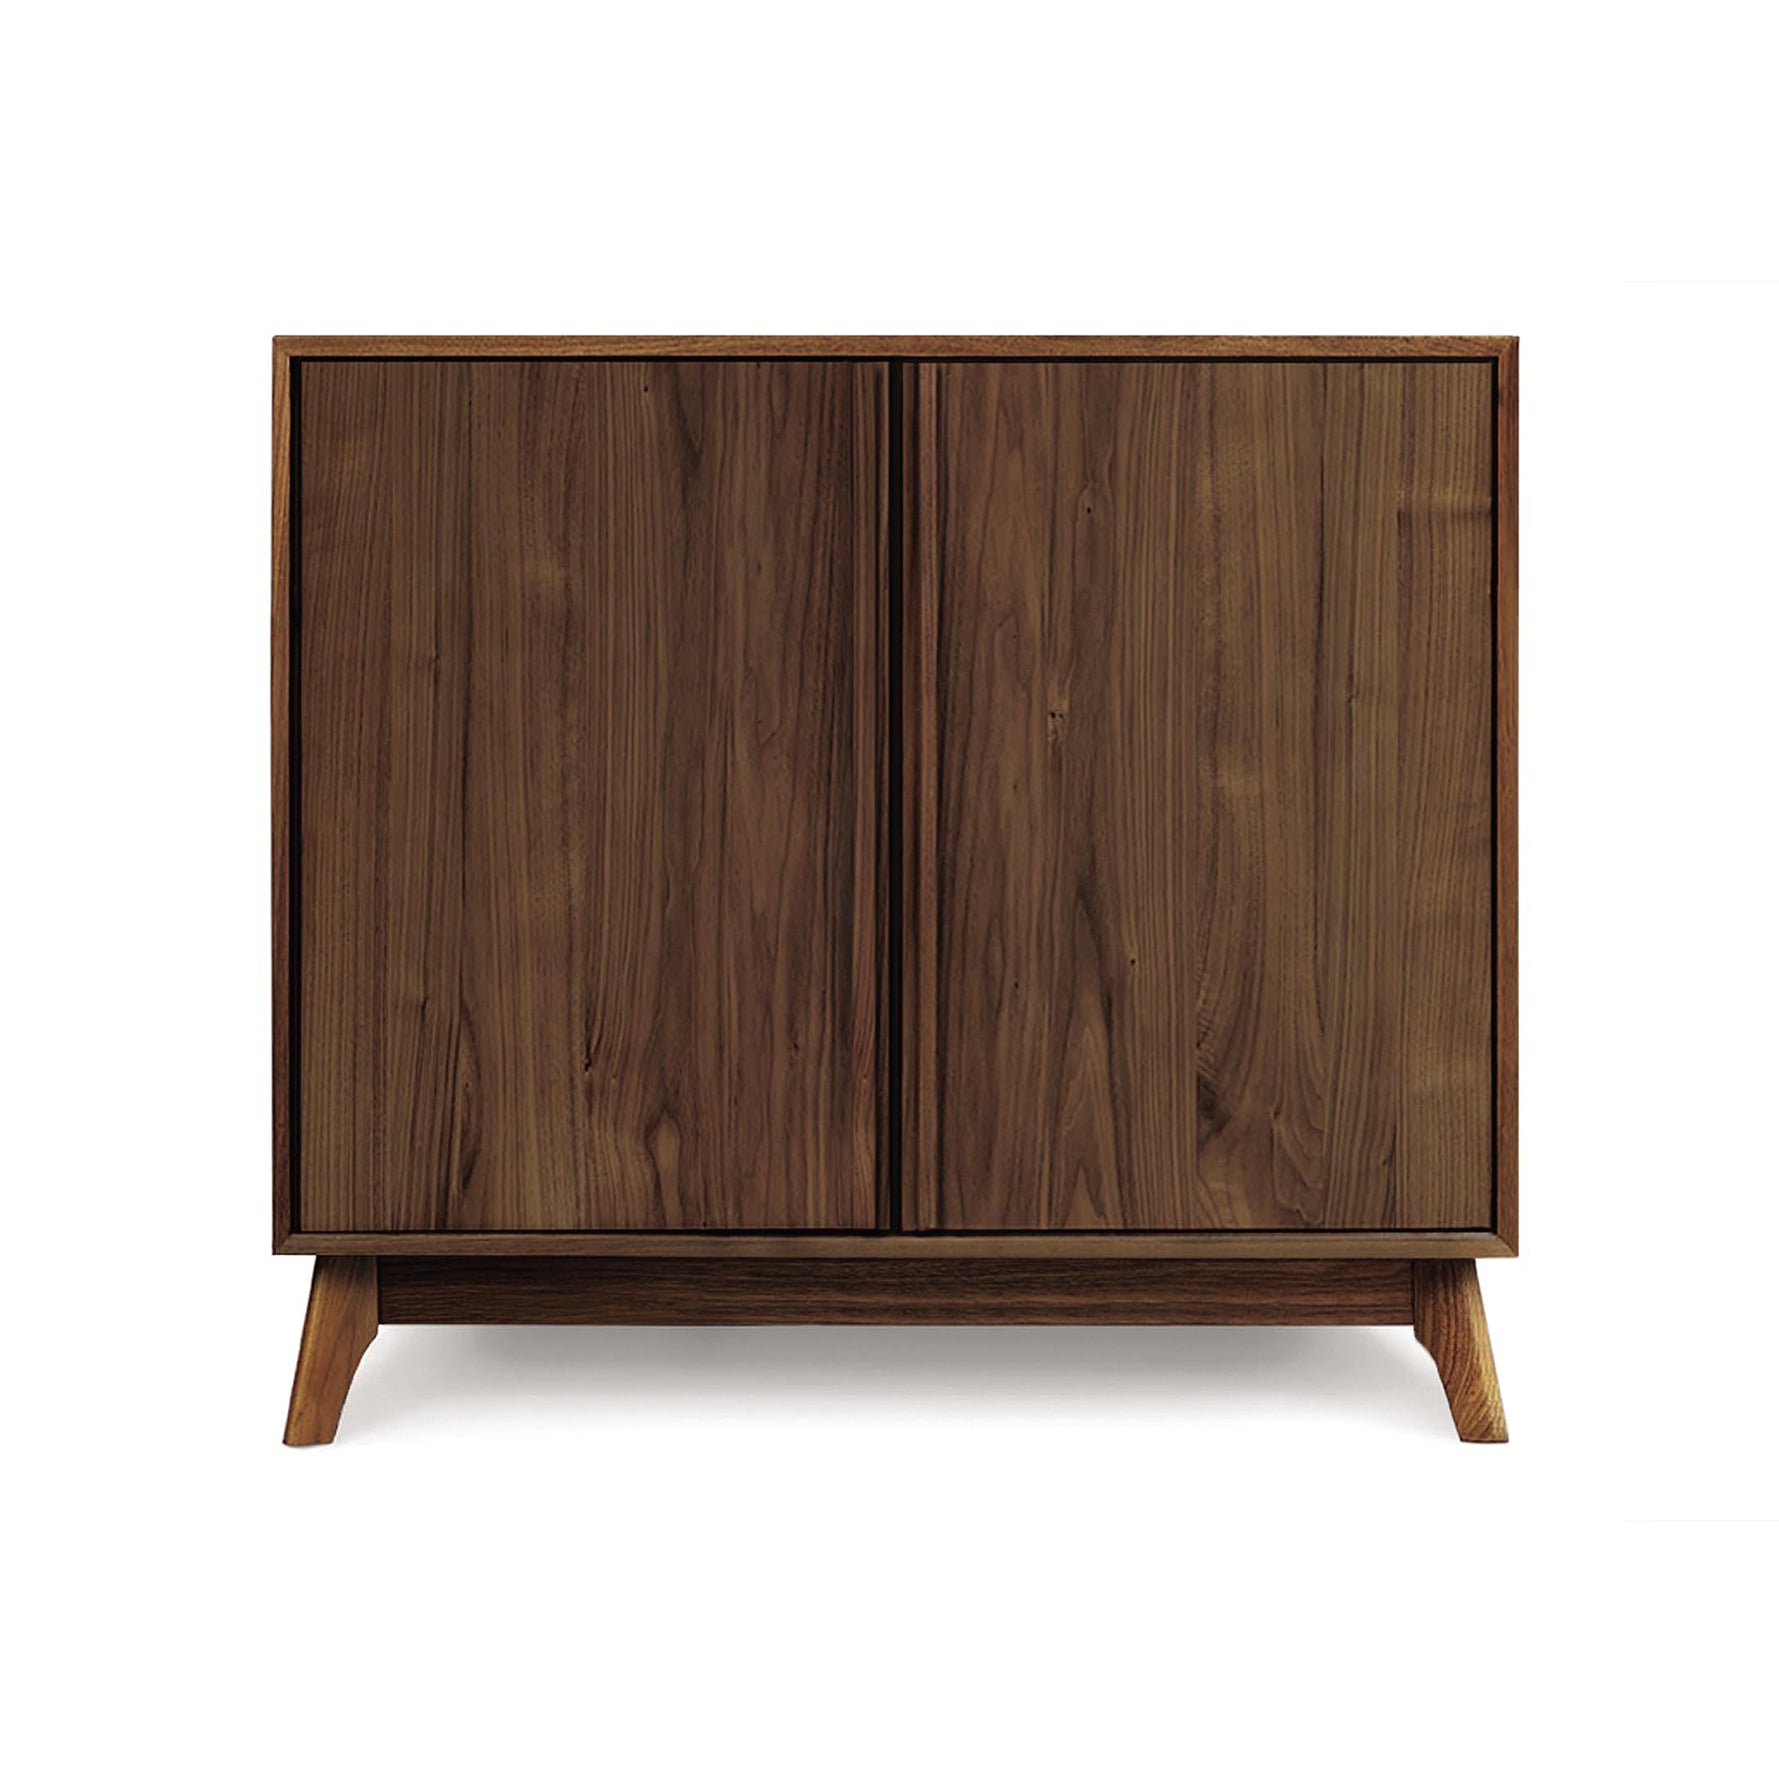 A Catalina 2-Door Buffet cabinet with angled legs against a white background. (Brand: Copeland Furniture)